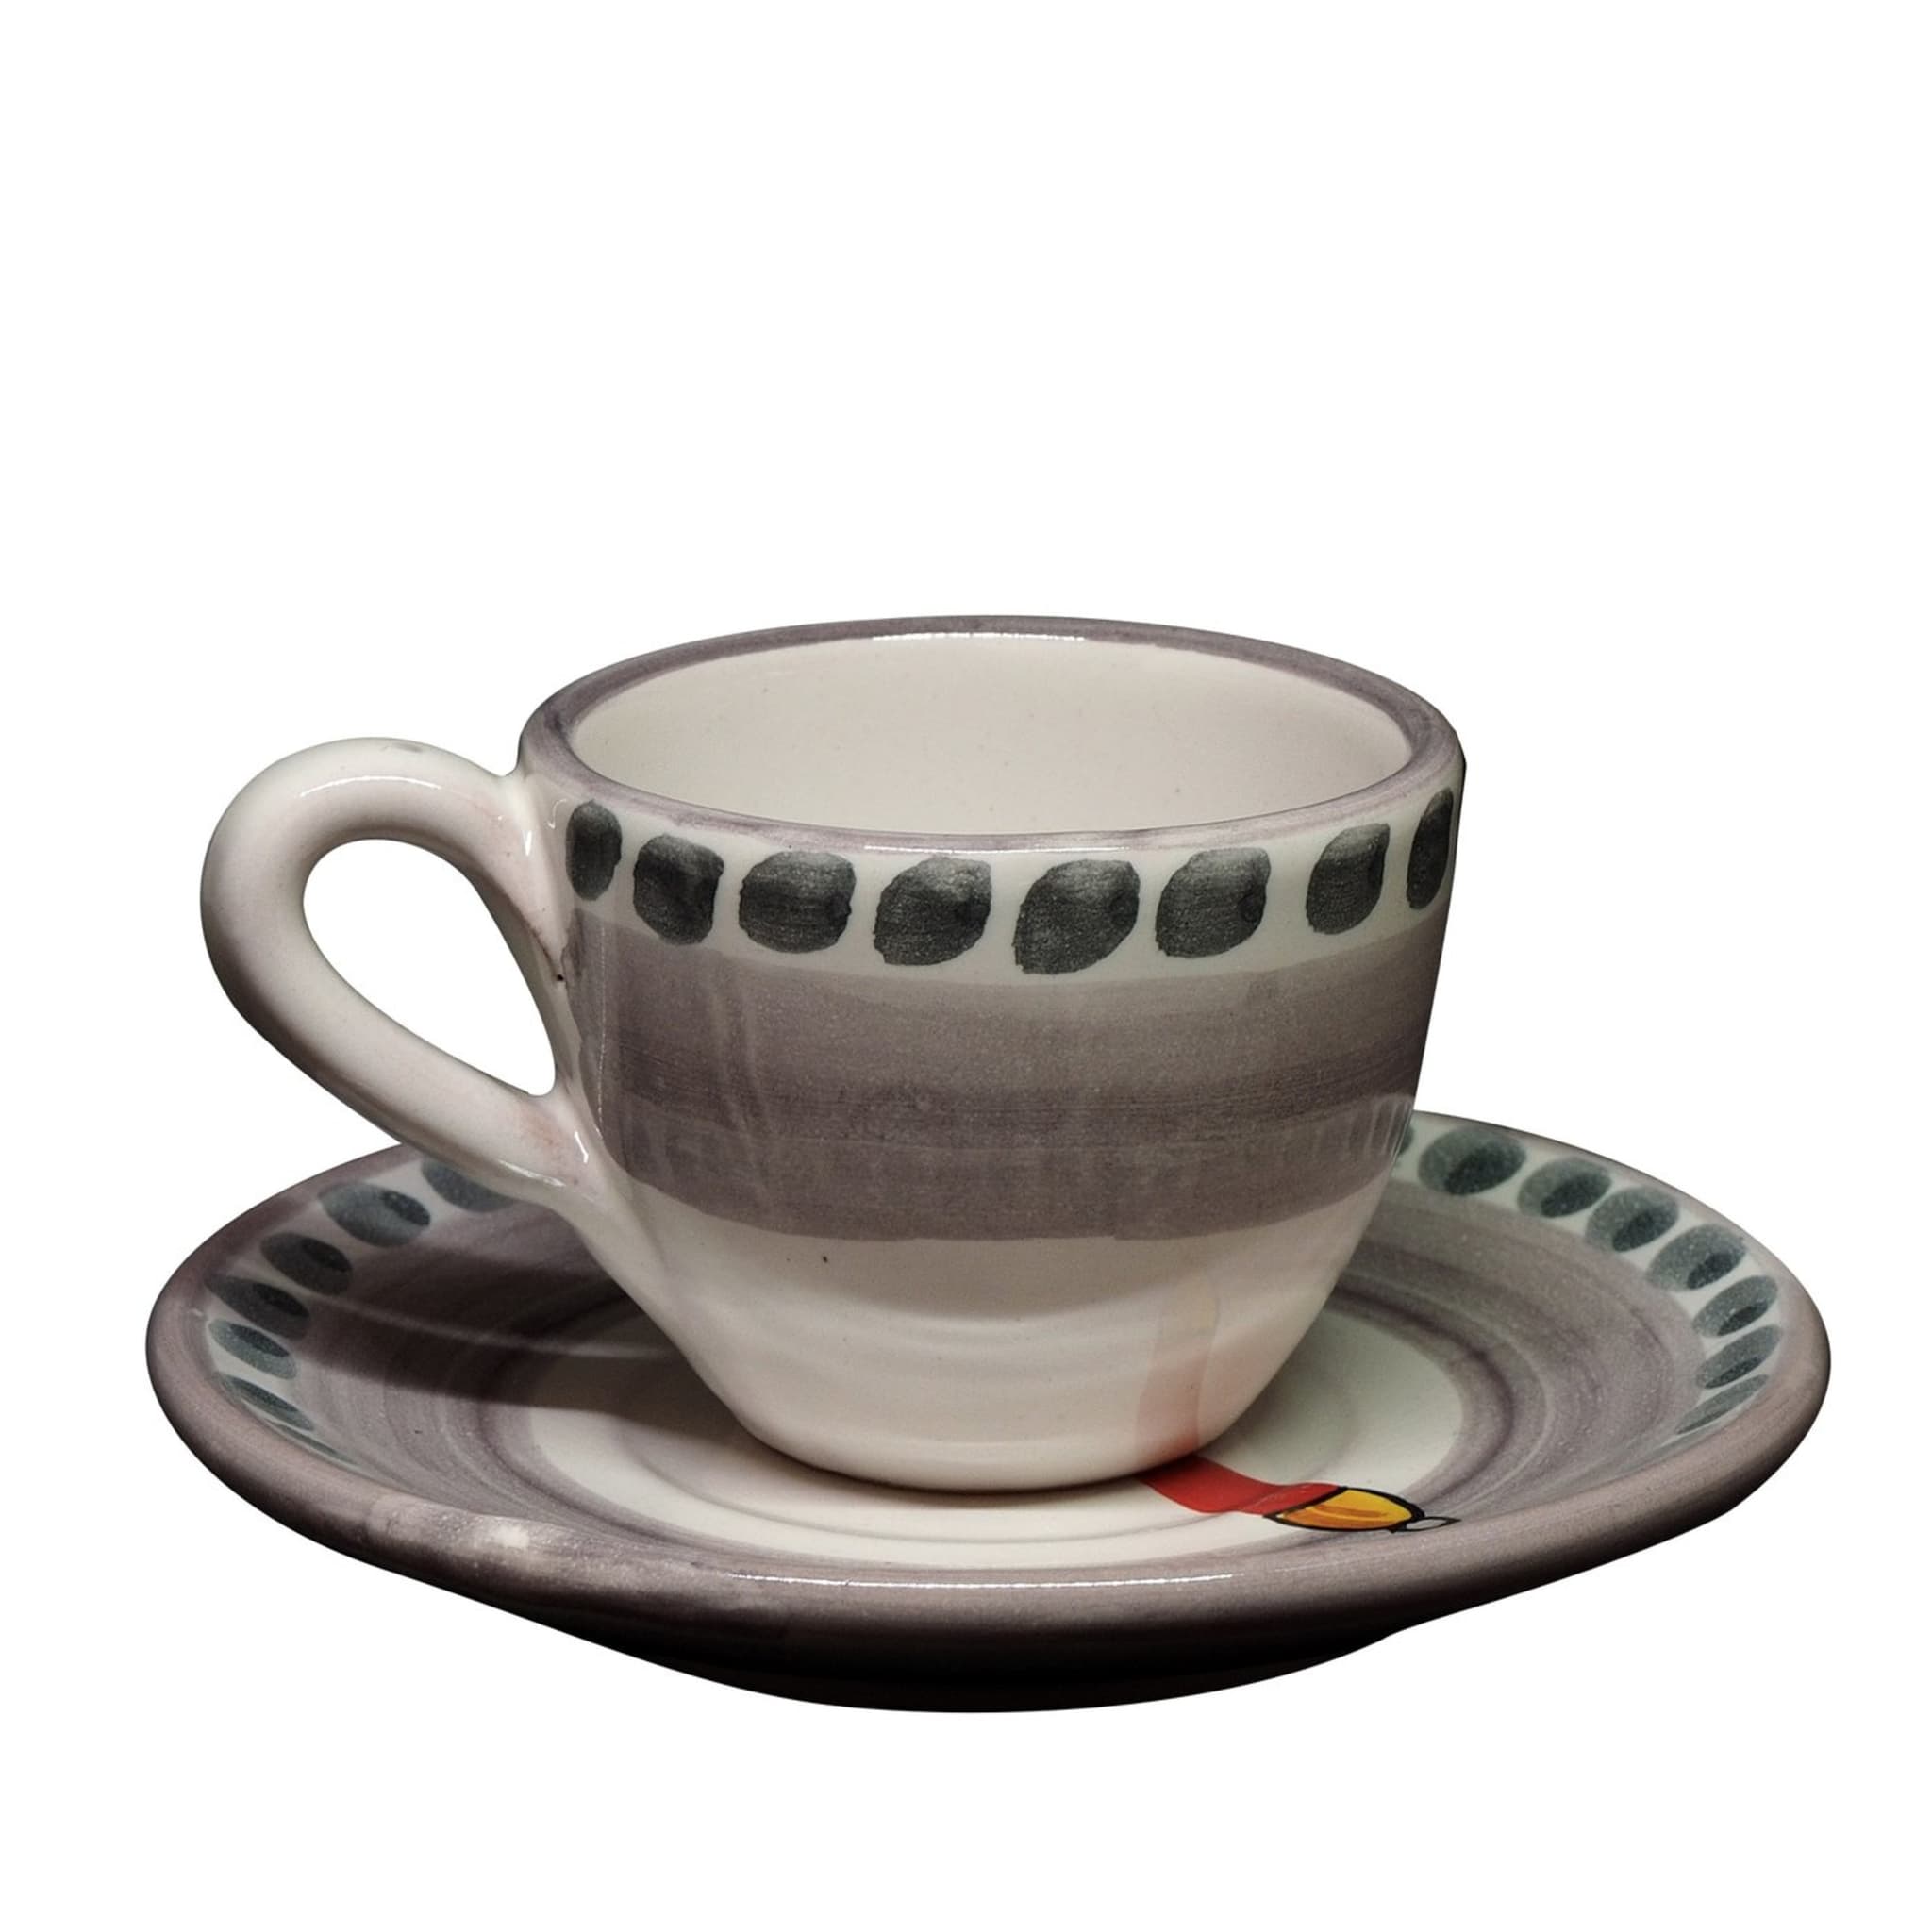 Tenore Espresso Set of 6 Cups and Saucers - Main view